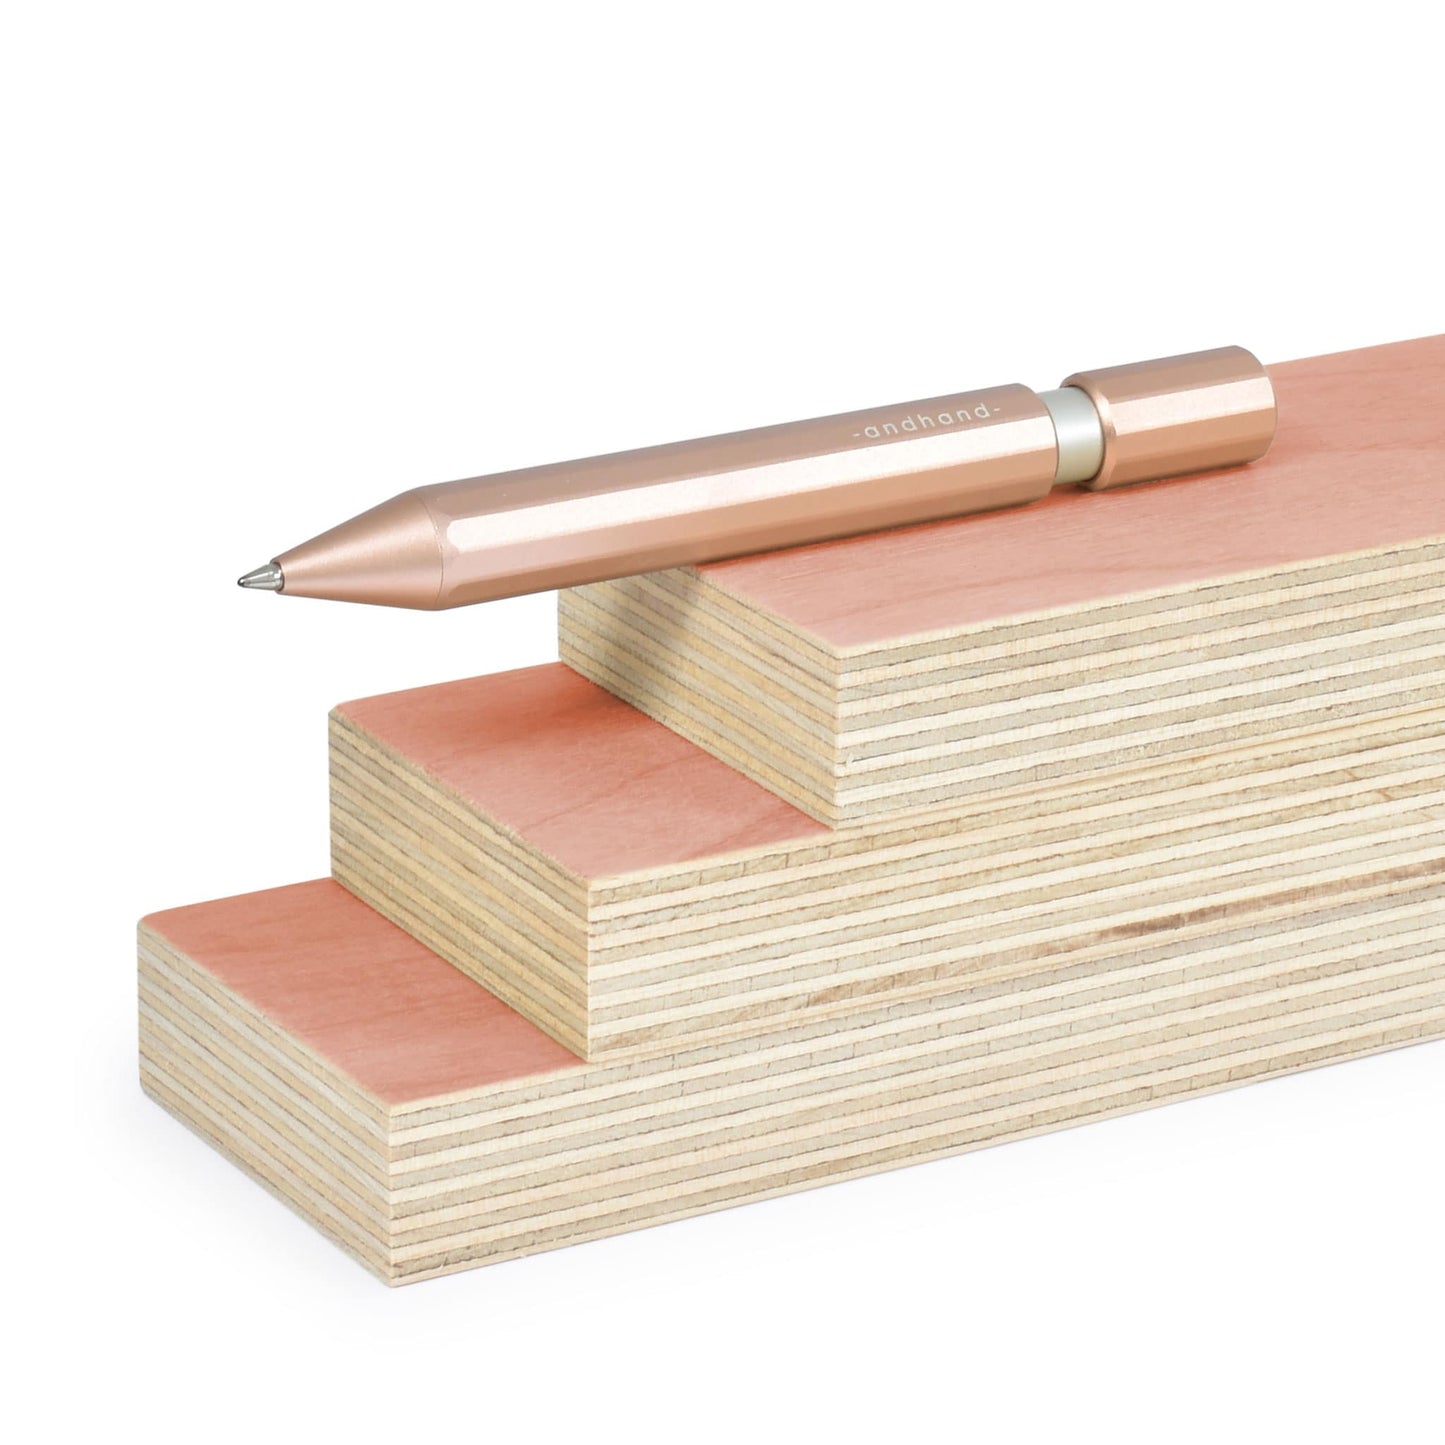 Aspect retractable pen in blush pink anodized finish. A great pen for journaling, sketching or note taking. Equipped with a capless system rollerball cartridge for great ink flow.